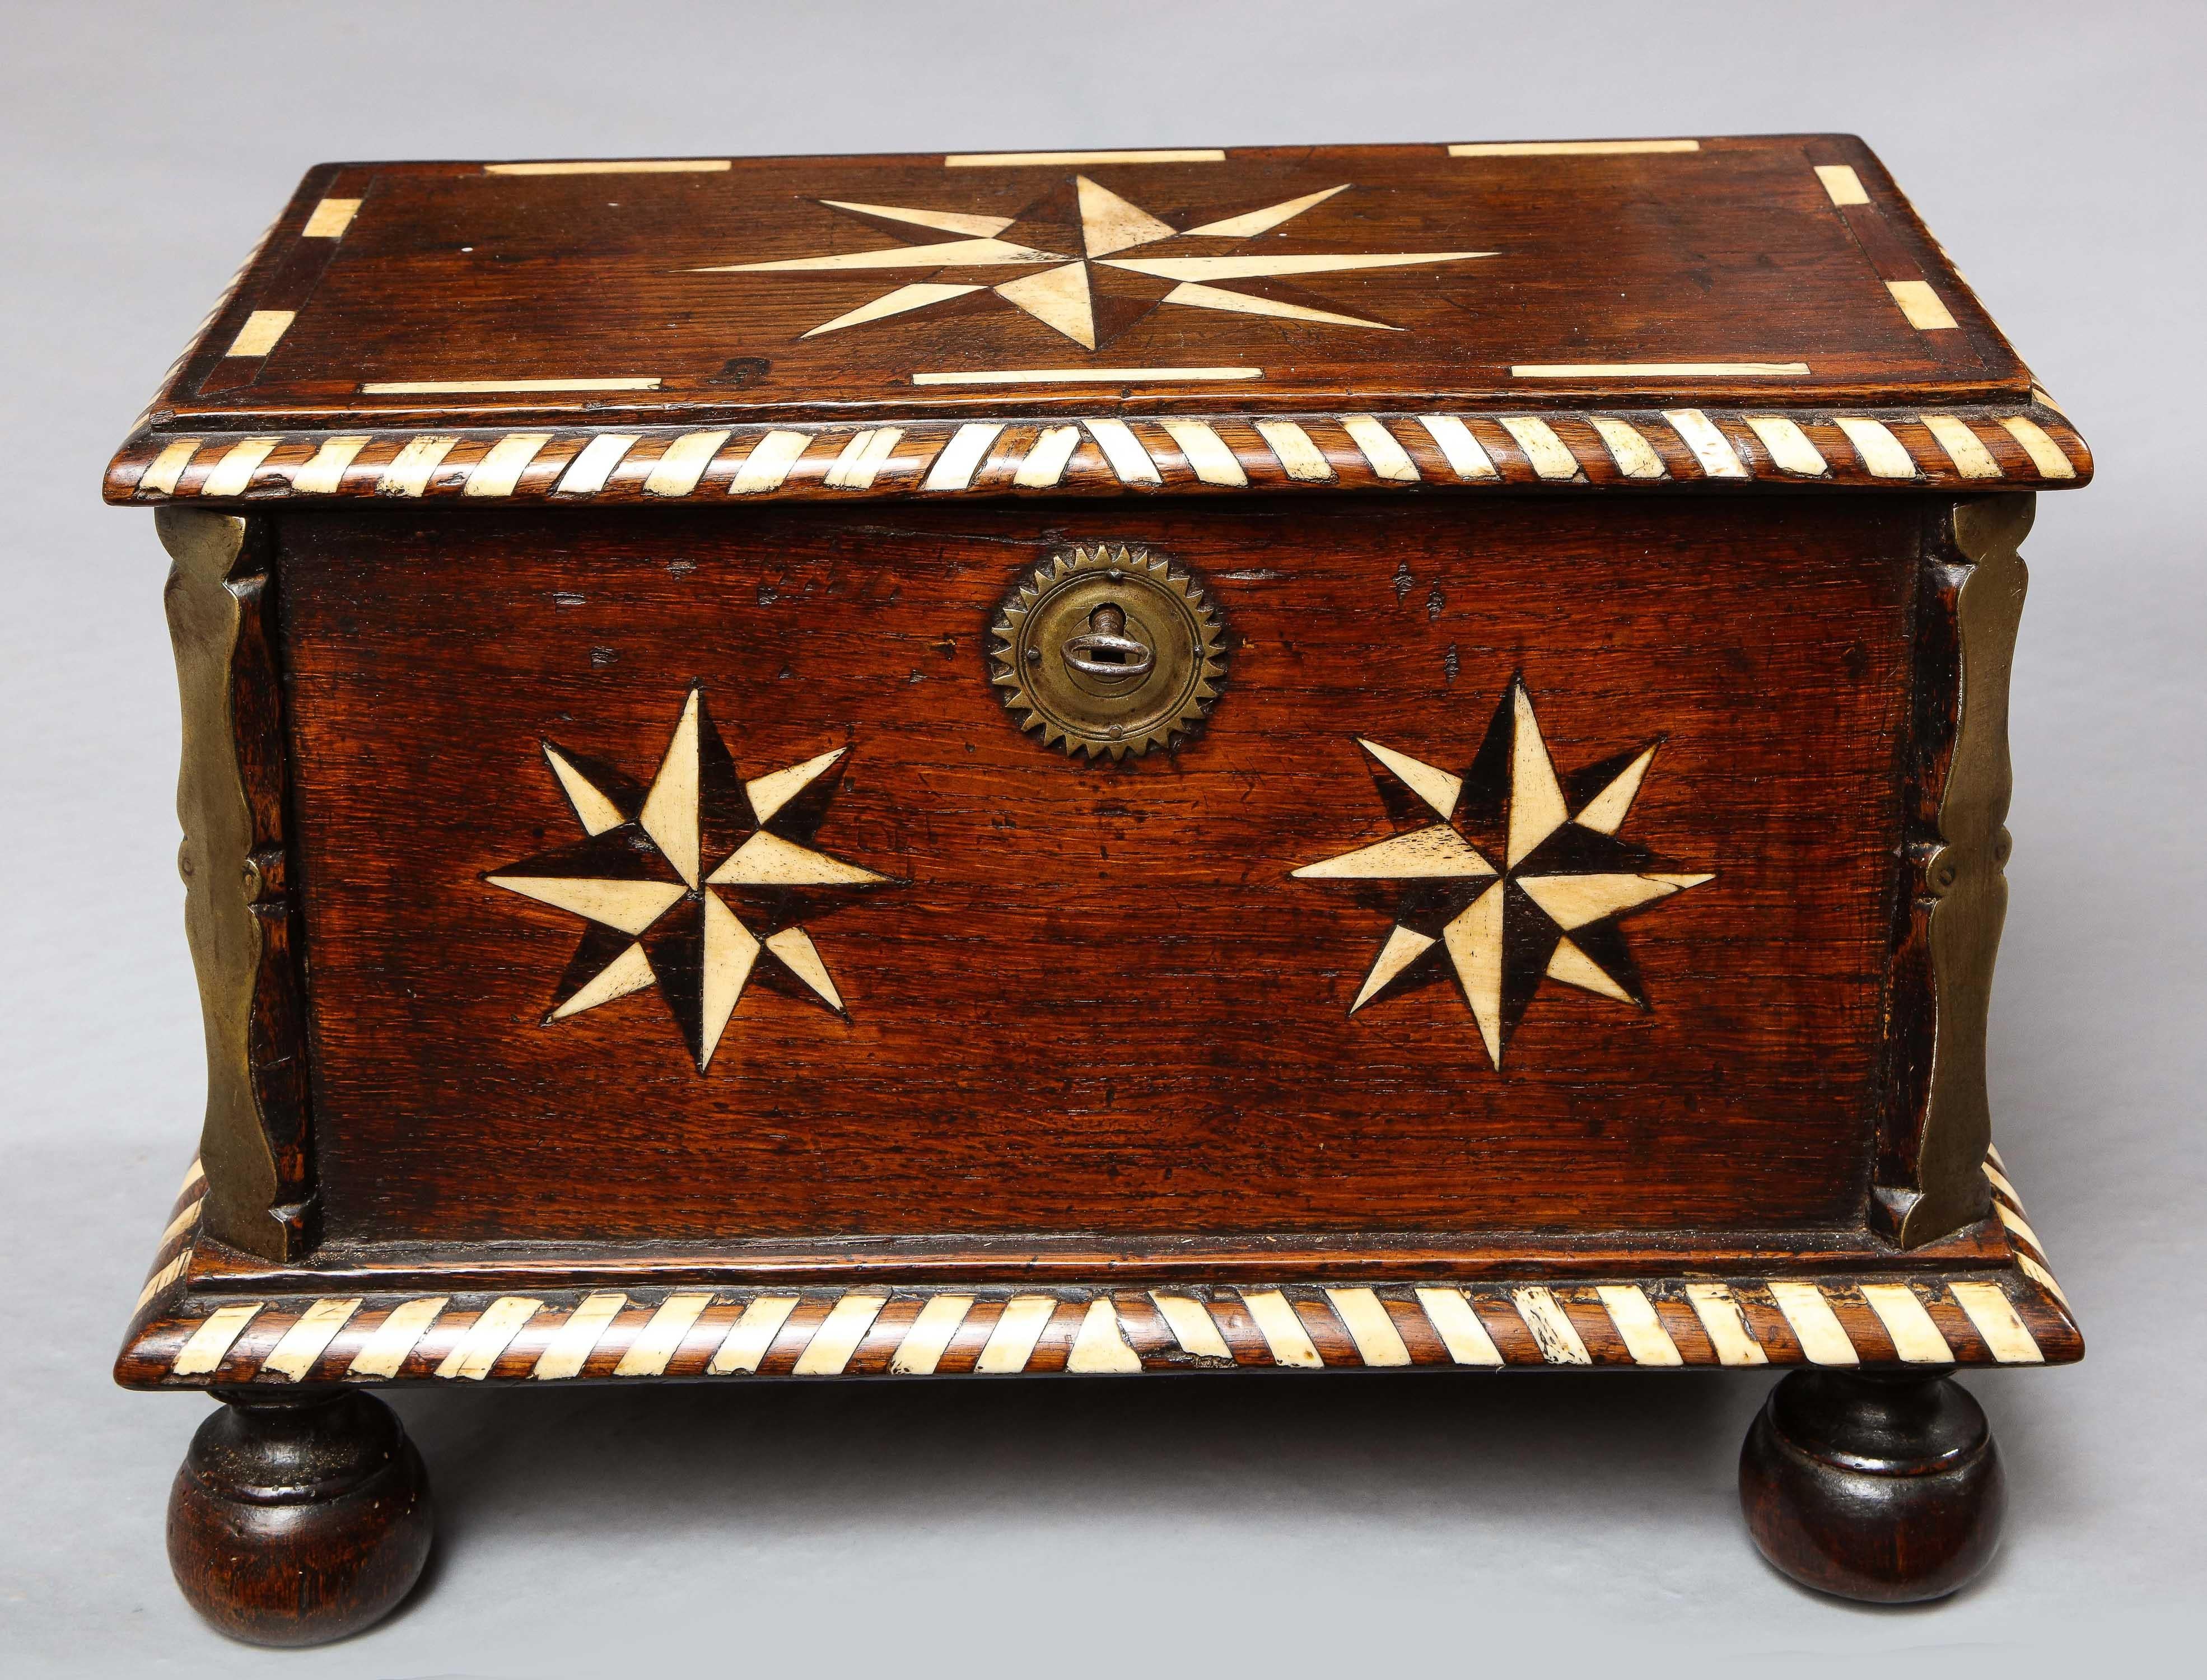 Rare mid-17th century English bone inlaid and brass mounted oak center table box, the top and sides inlaid with compass stars in bone and ebonized fruit-wood, the edges with bone and oak inlaid gadrooning, the corners mounted with double balustrade